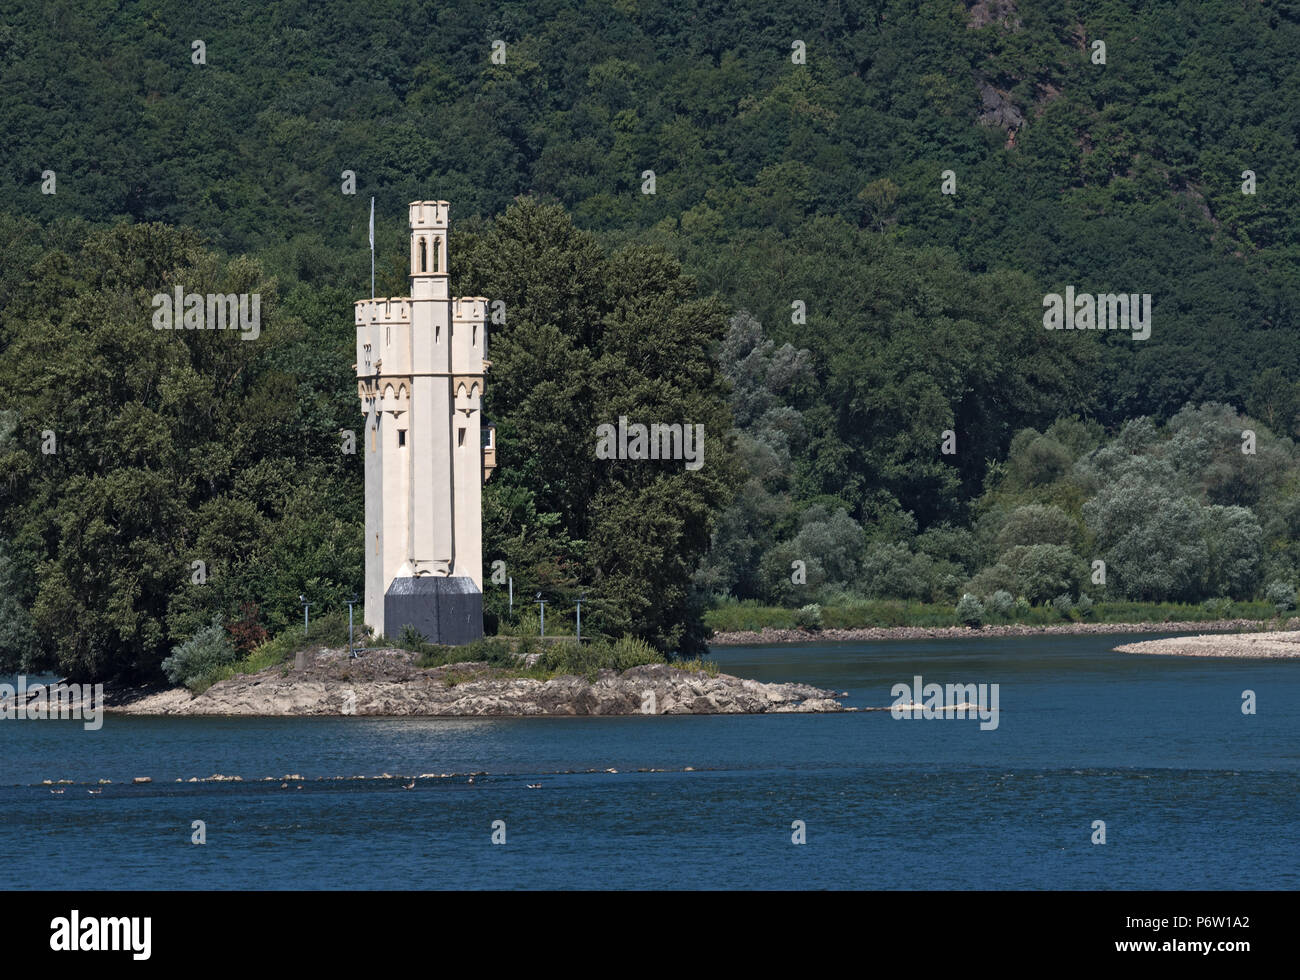 The Binger Mouse Tower, Mauseturm on a small island in the Rhine river, Germany Stock Photo